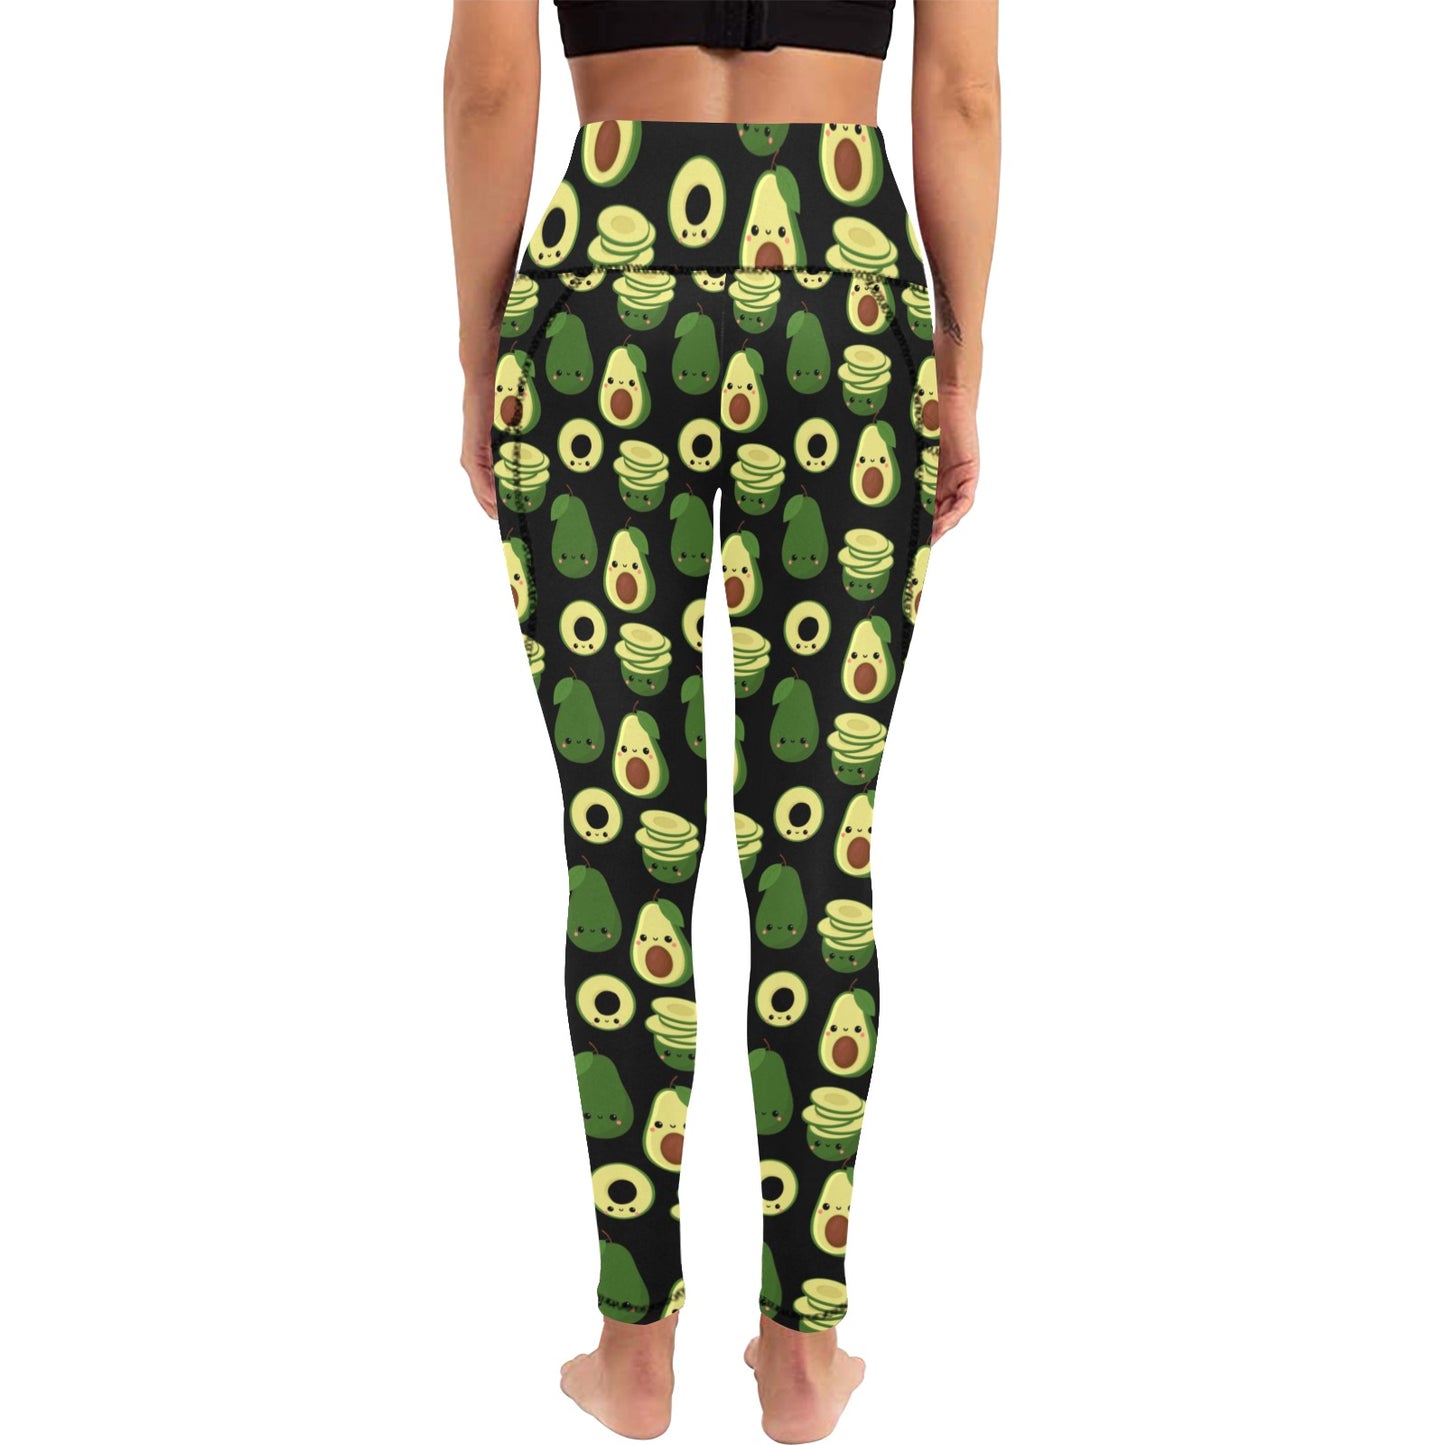 Cute Avocados - Women's Leggings with Pockets Women's Leggings with Pockets S - 2XL Food